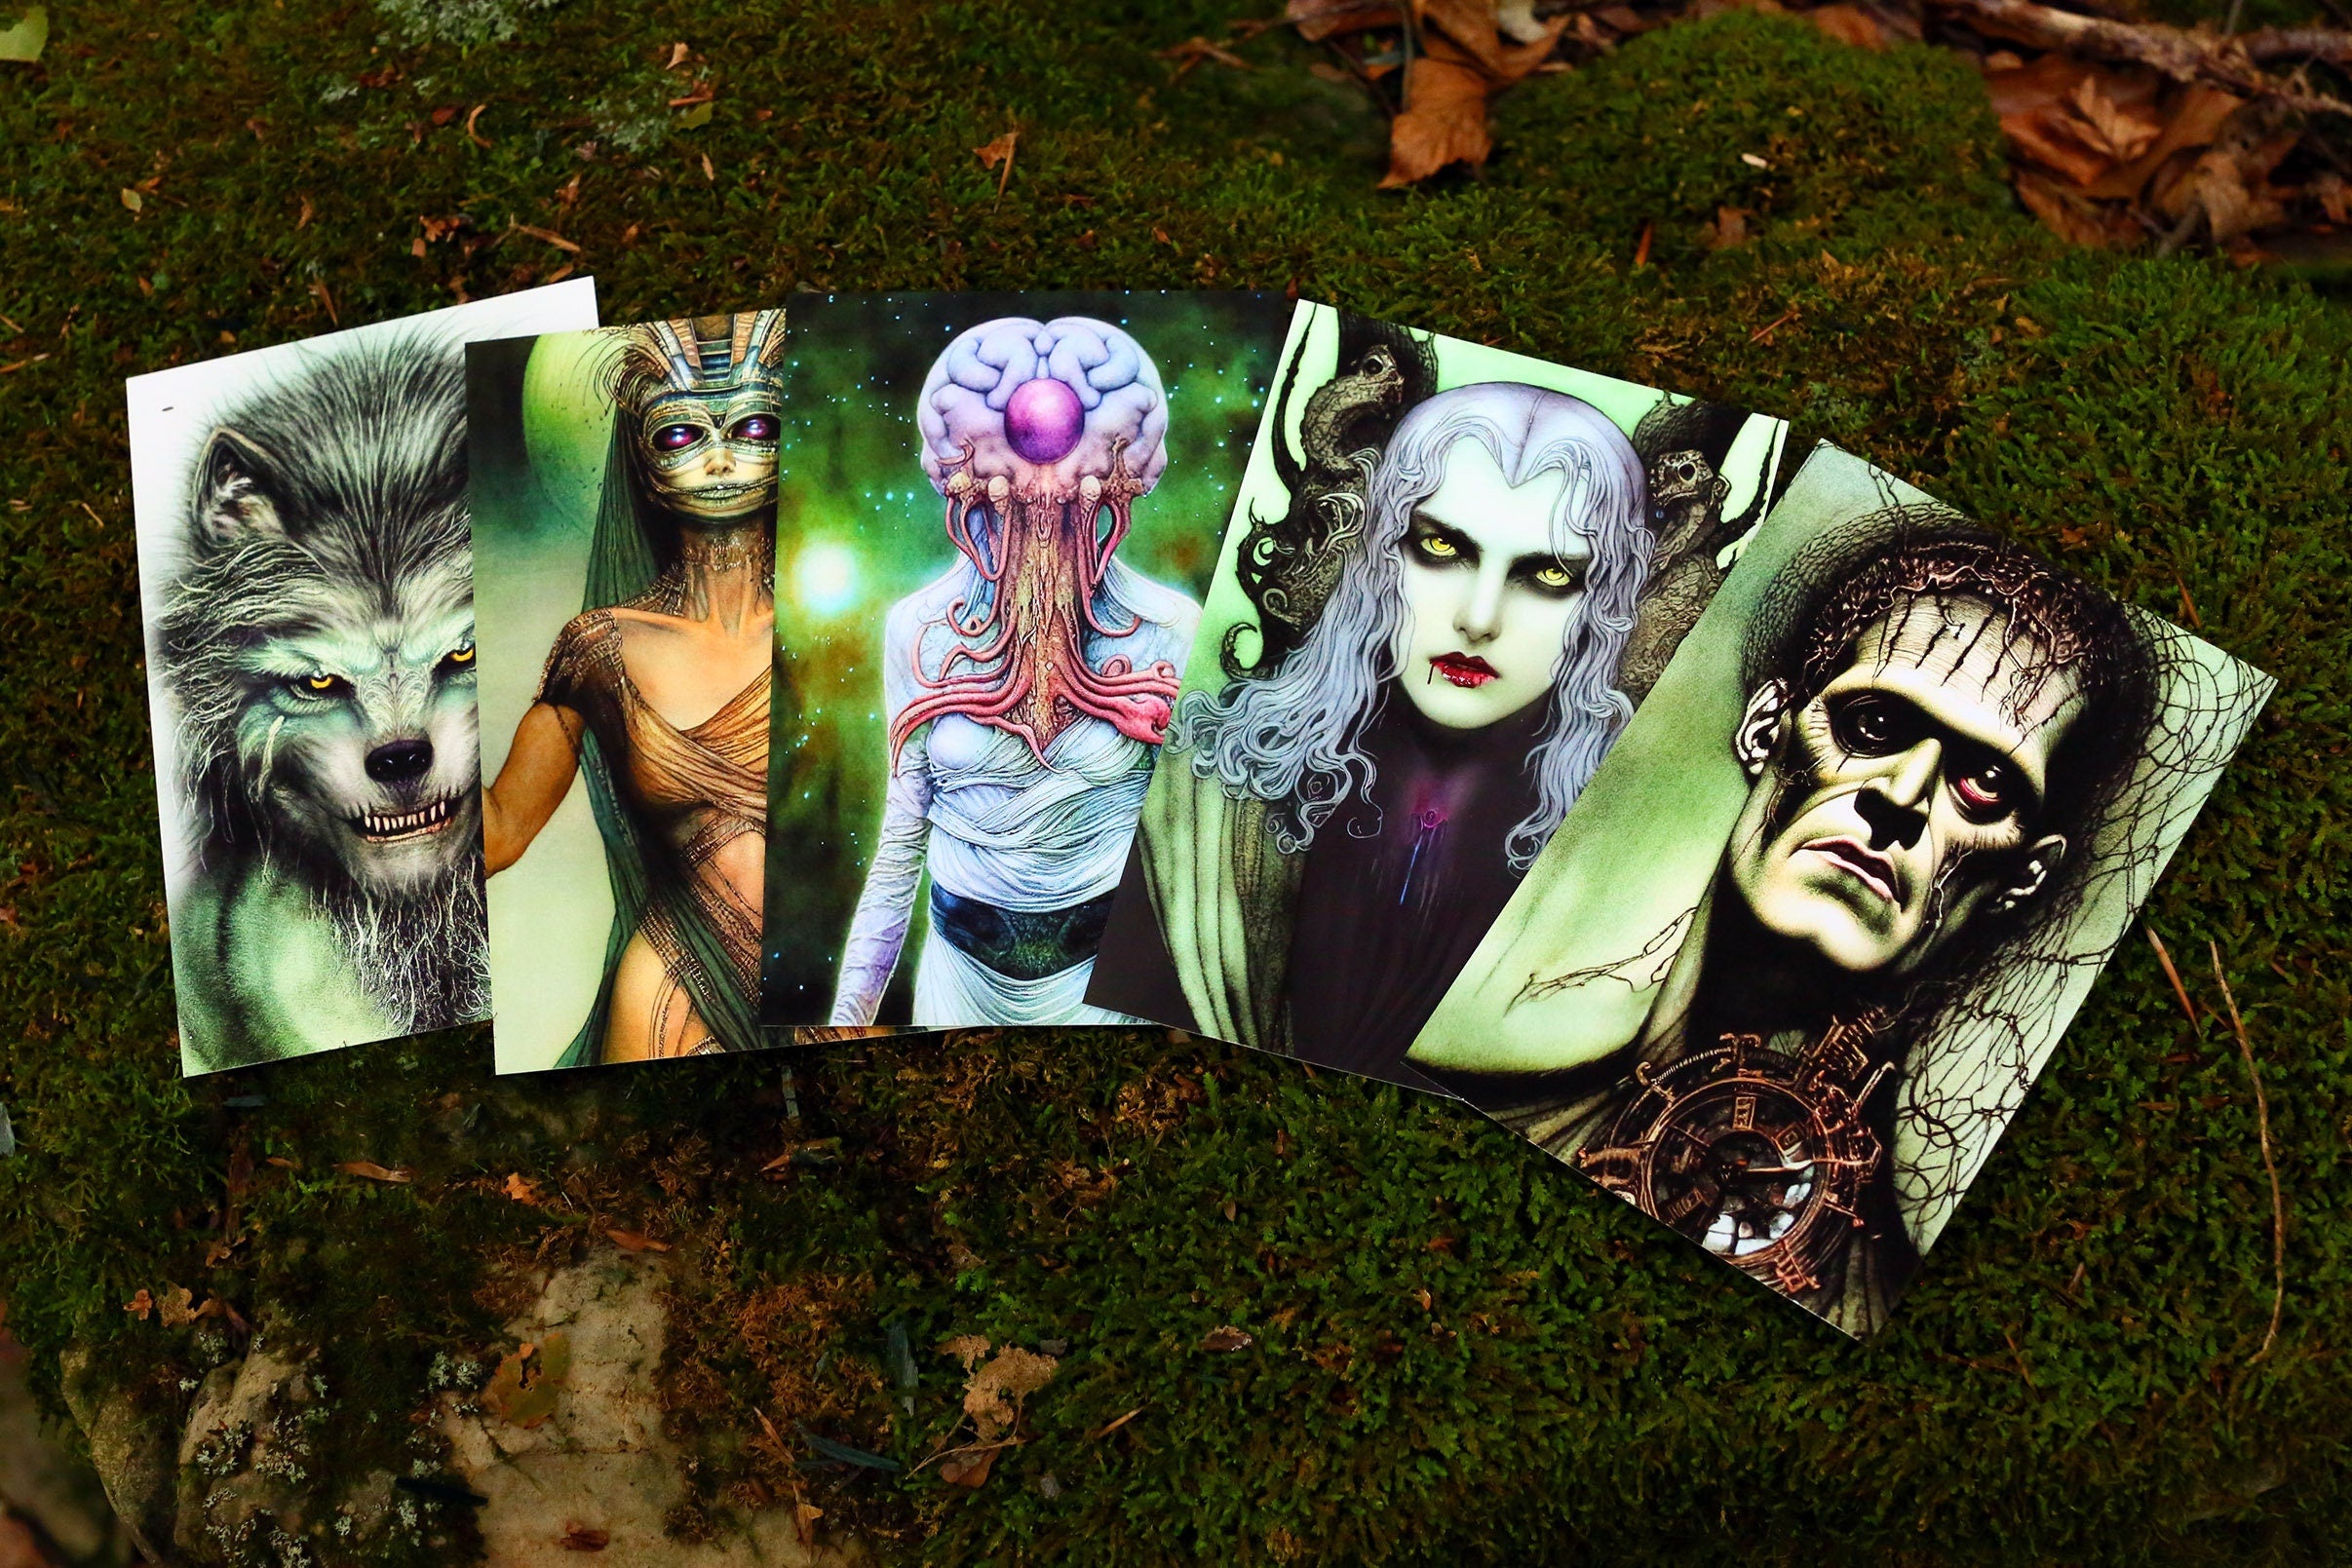 Classic Movie Monsters, Illustrated Halloween Postcards for Horror Buffs, Set of 12 Original Designs